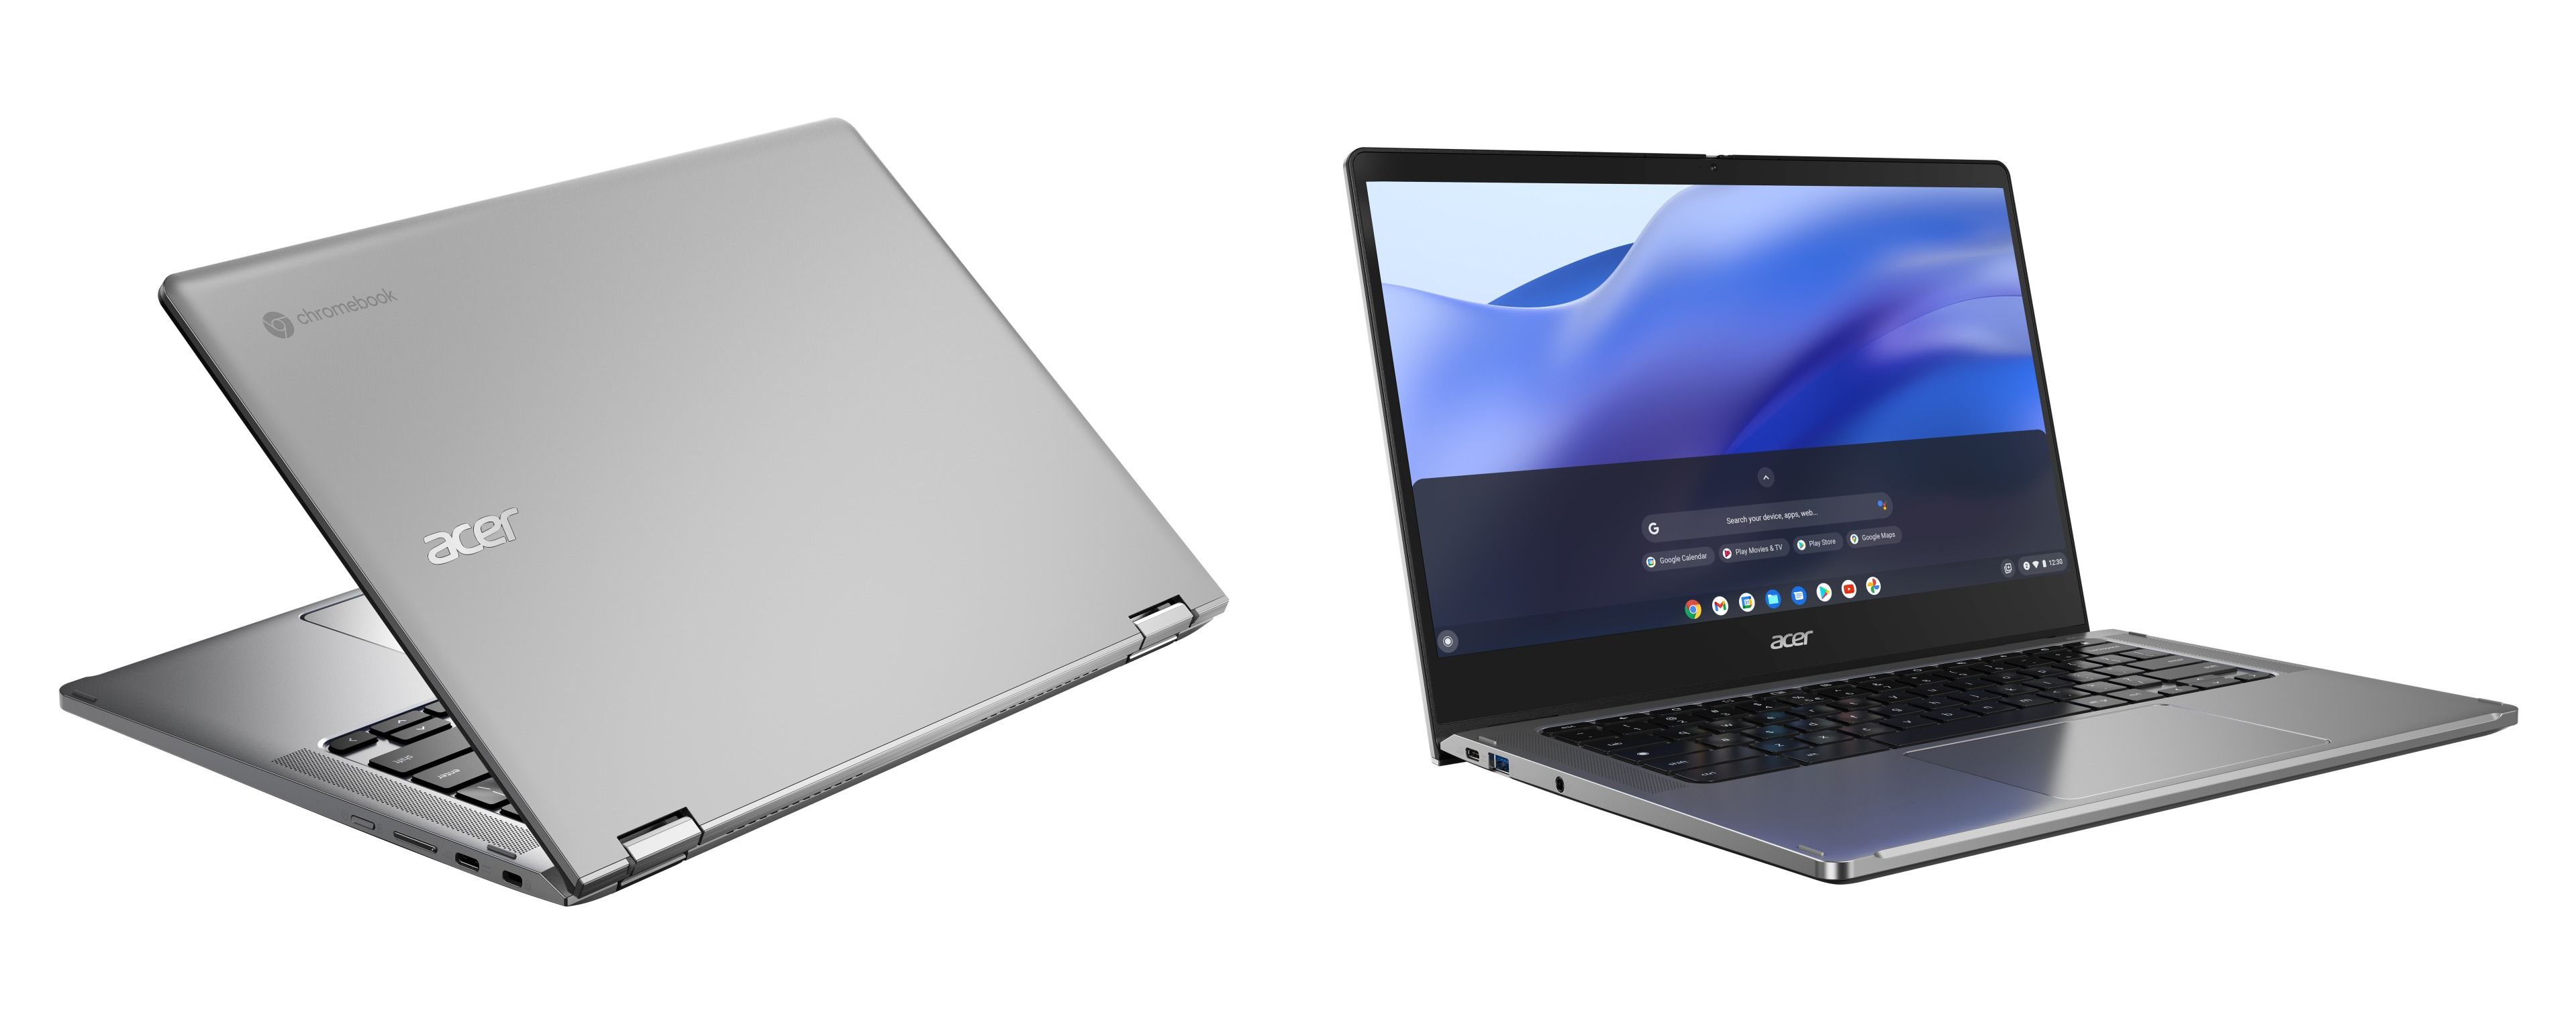 Acer Chromebooks from back and front